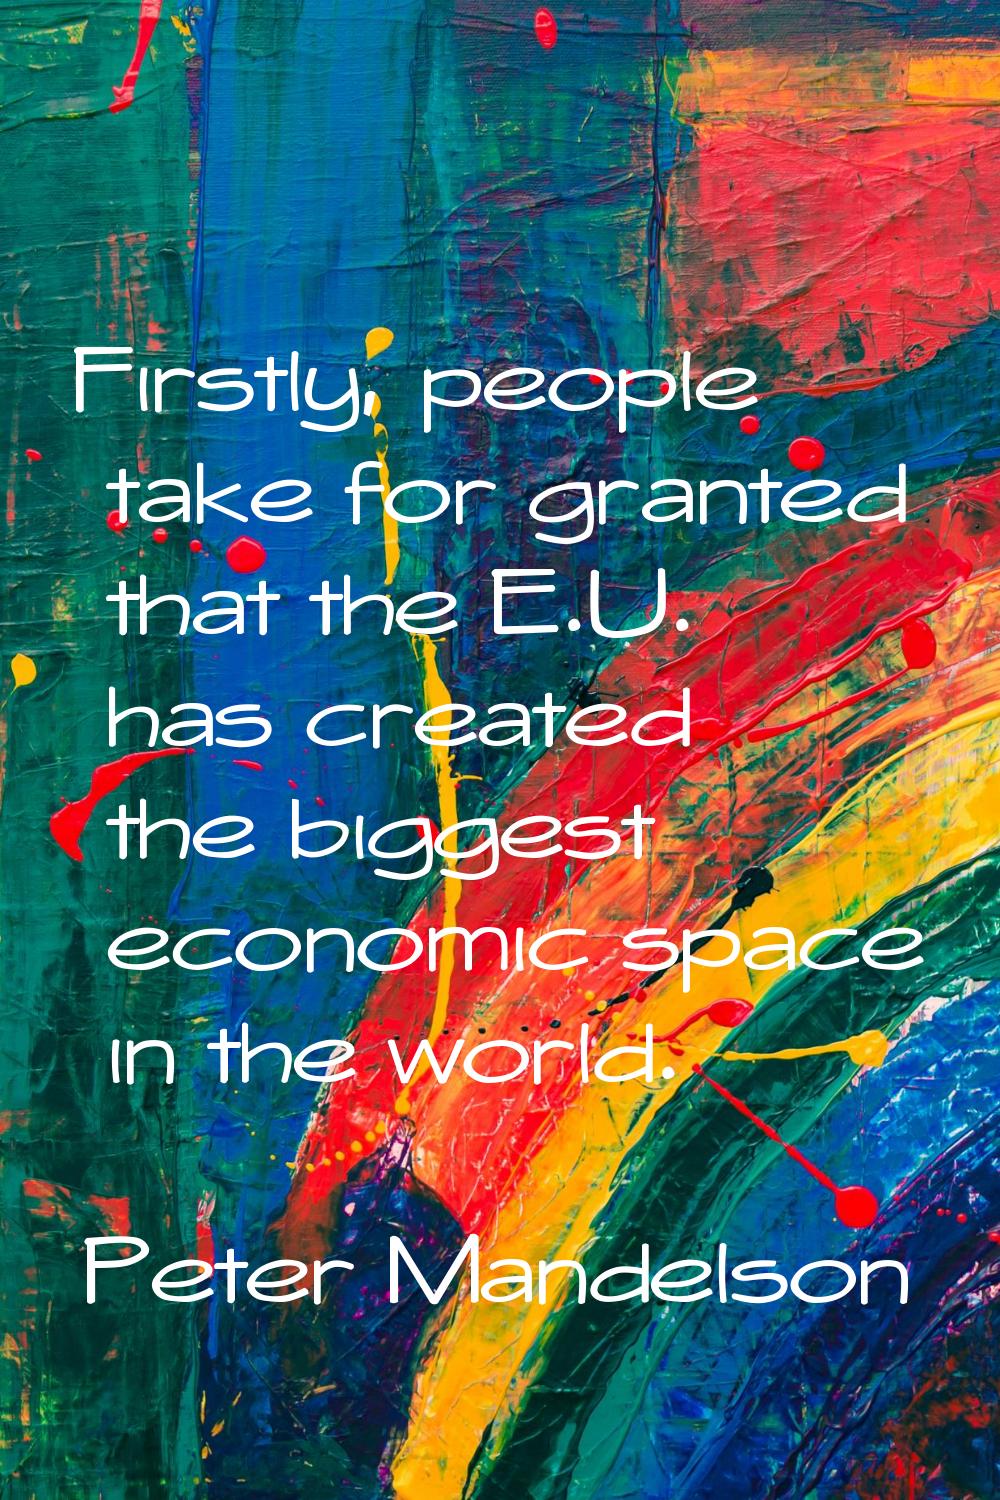 Firstly, people take for granted that the E.U. has created the biggest economic space in the world.